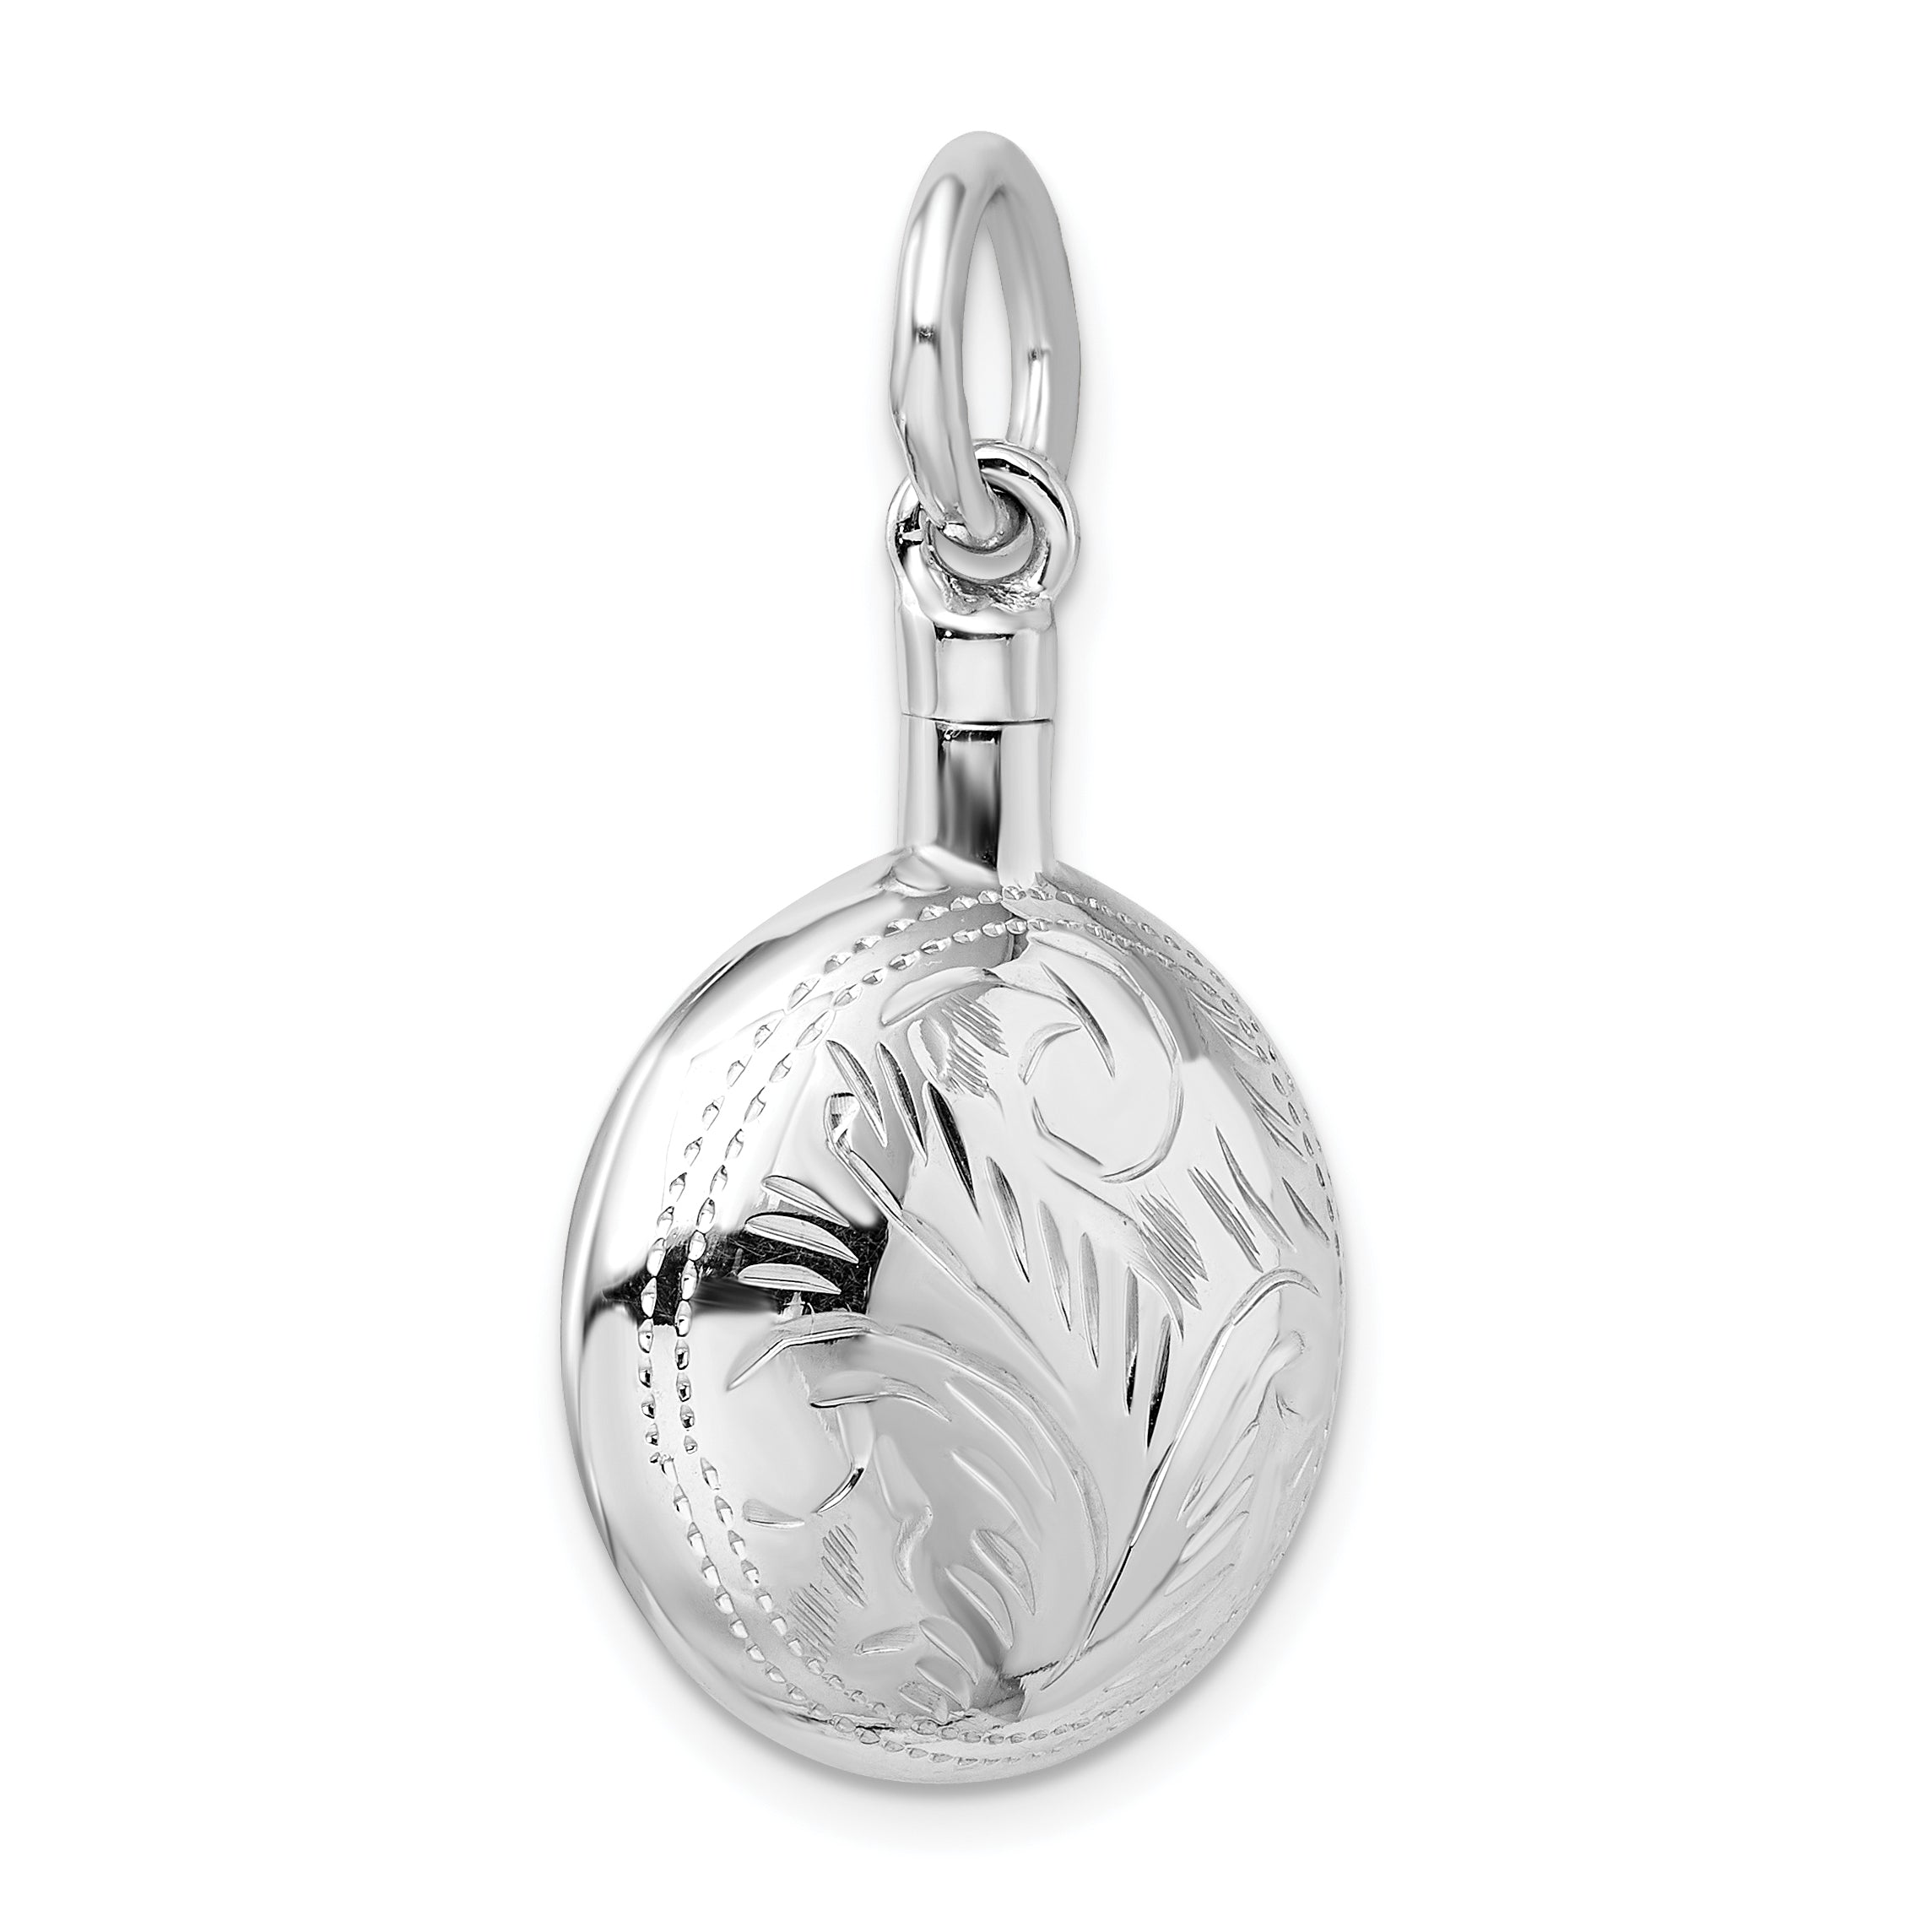 Sterling Silver RH-plated Polished Screw Top Ash Holder Pendant